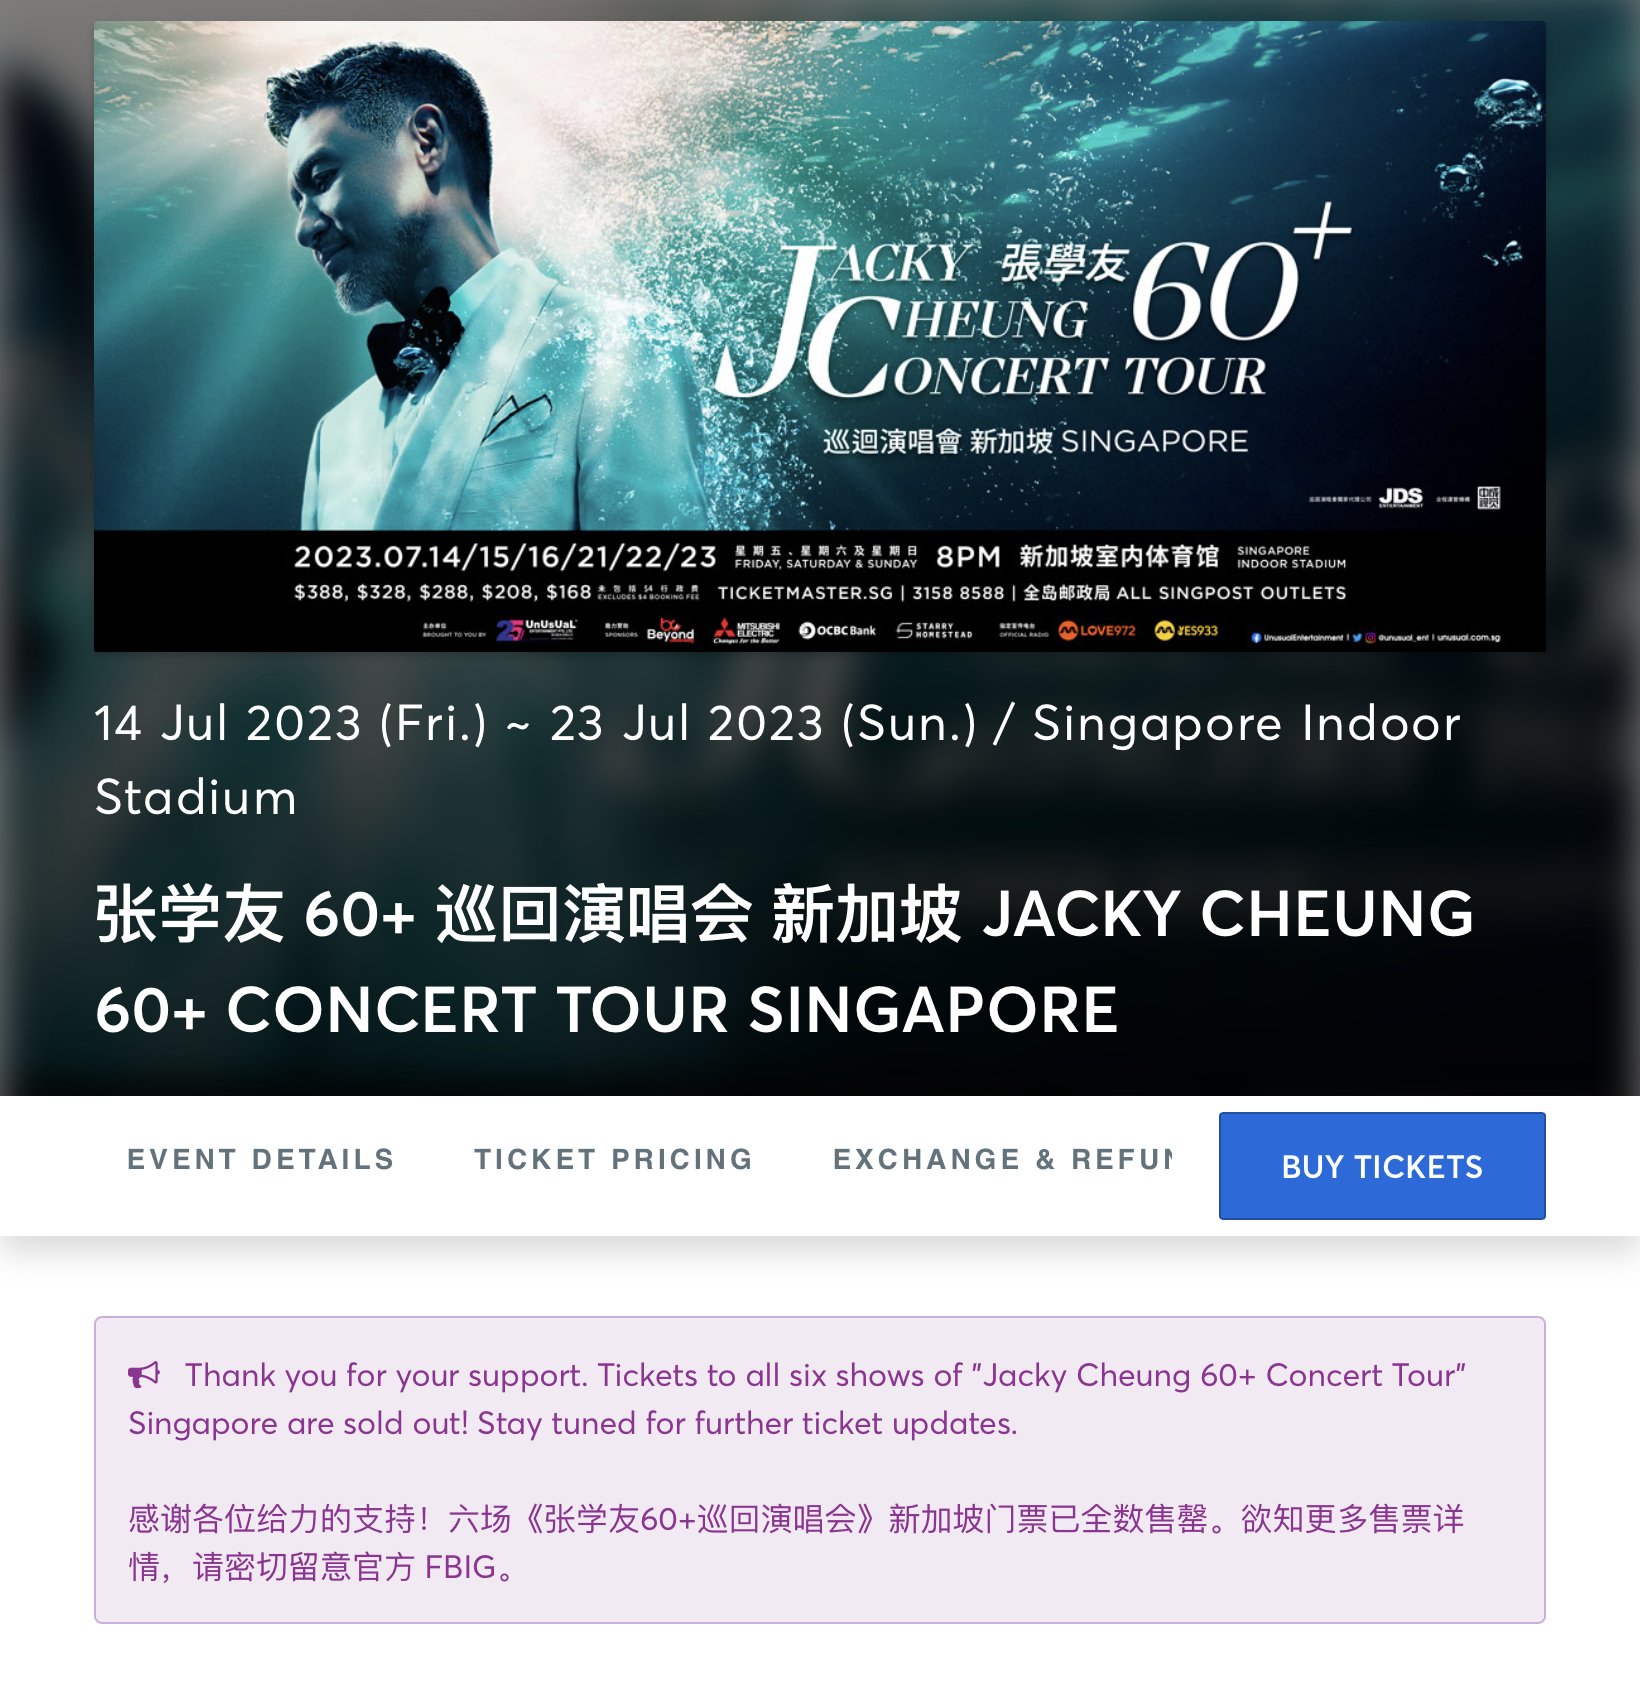 jacky cheung tickets